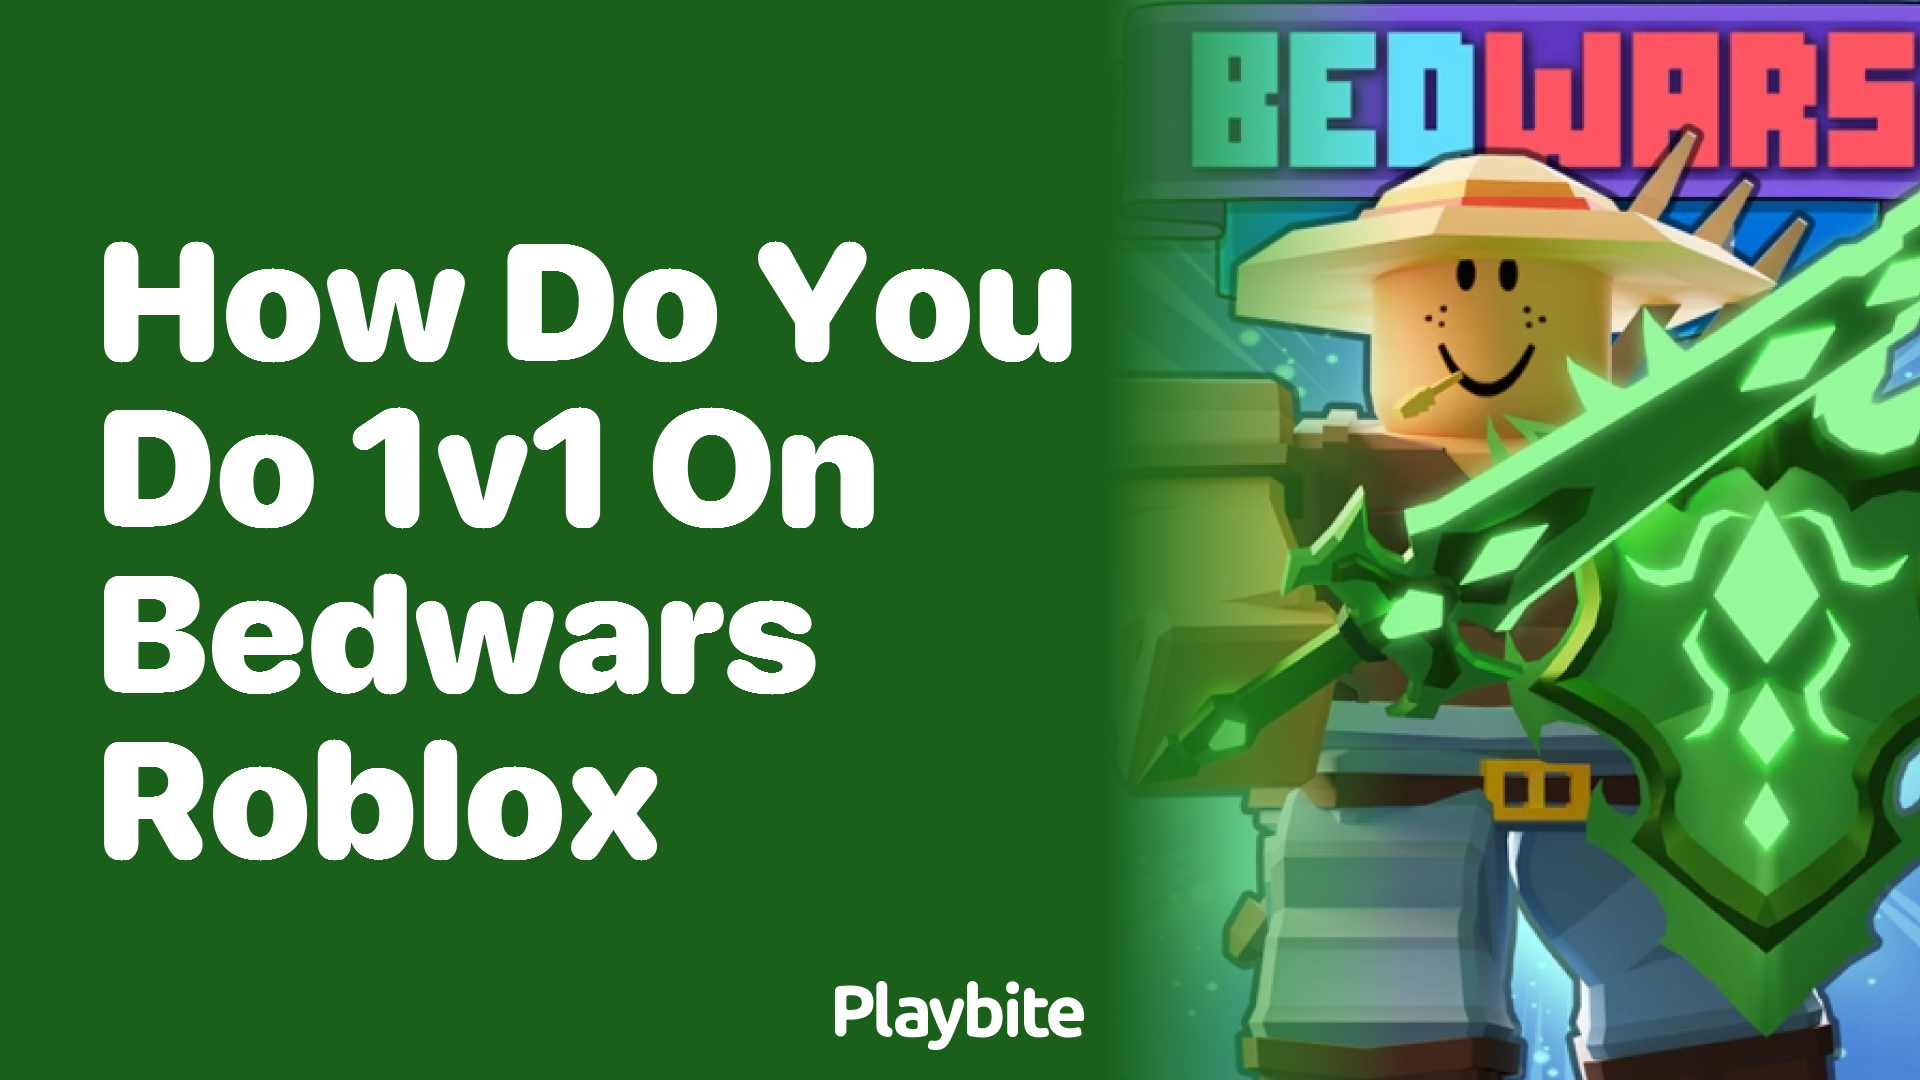 How to Do 1v1 on Bedwars Roblox